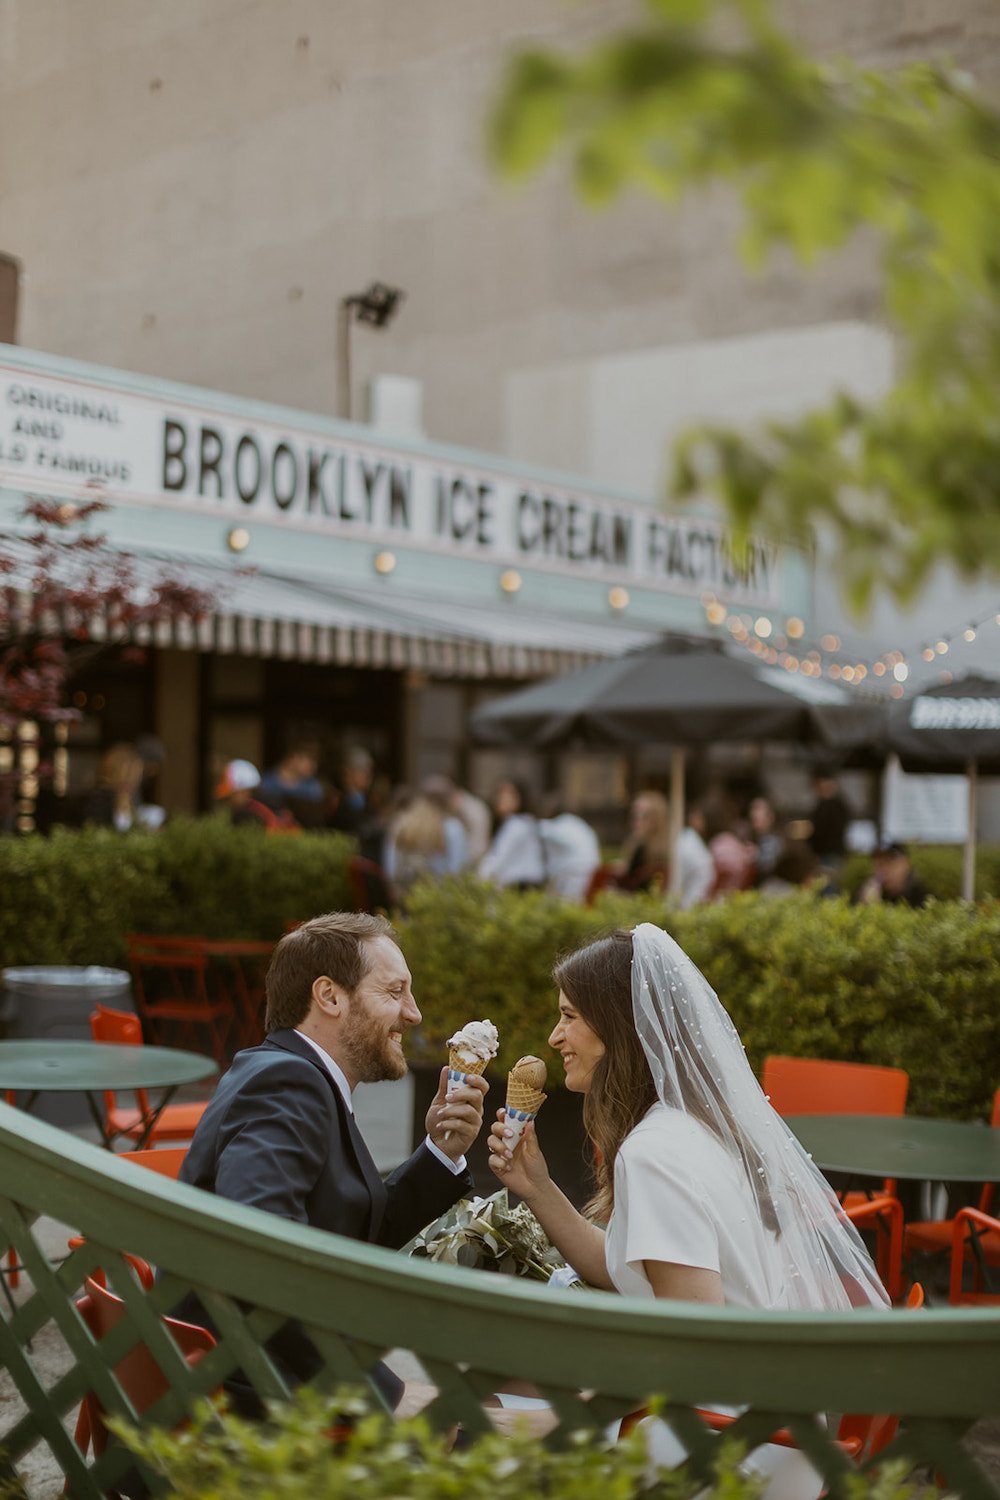 Couple smiling while sharing some of their favorite ice creams at Brooklyn Ice Cream Company